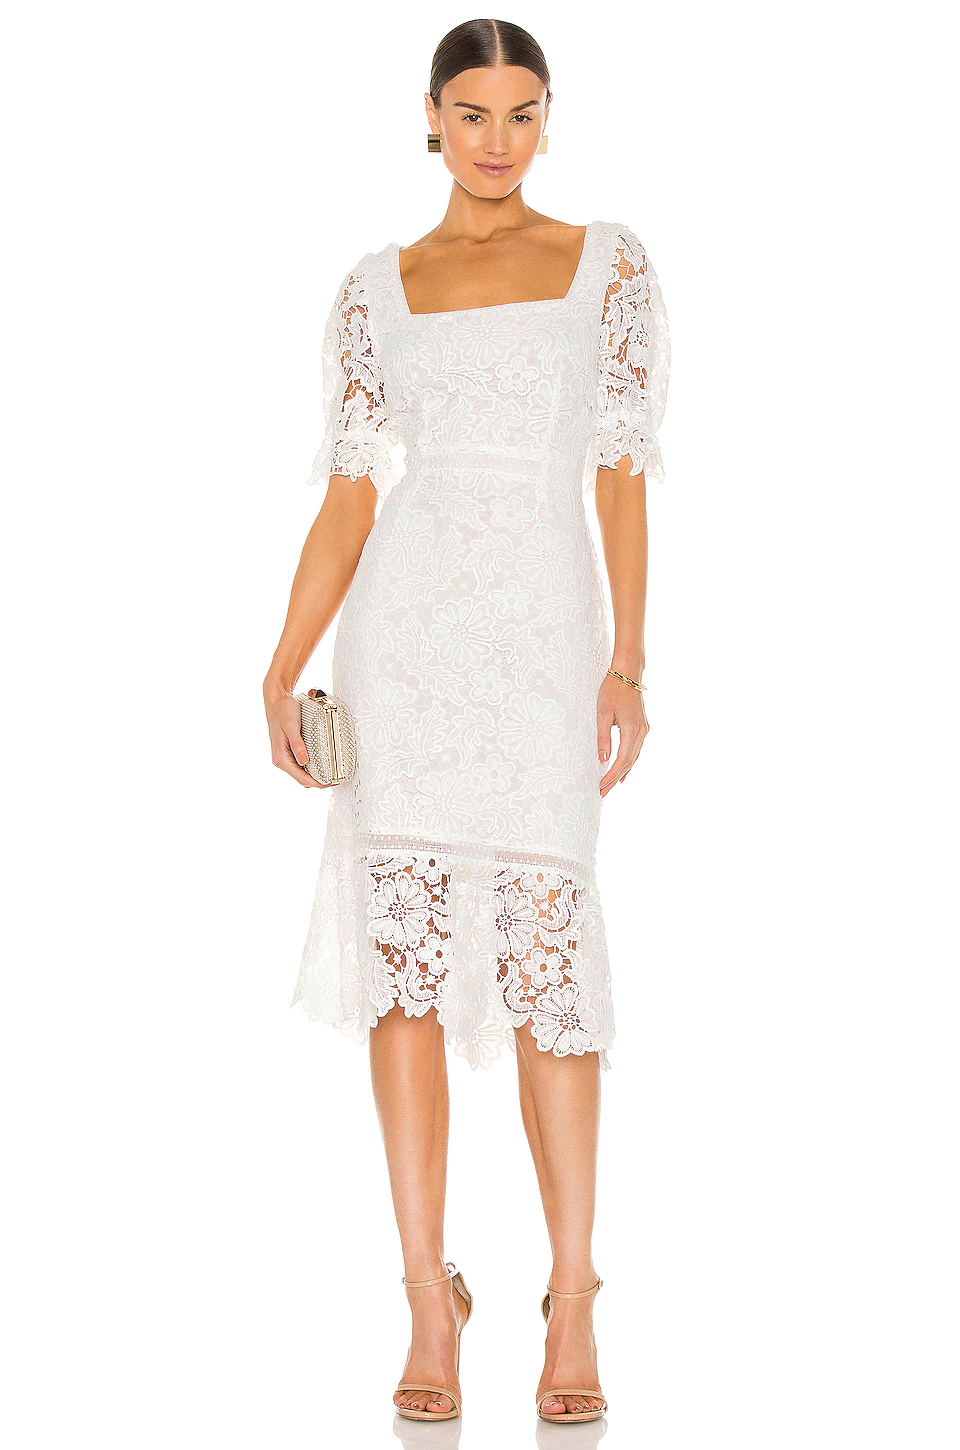 white square lace bridal shower dress with cap sleeves